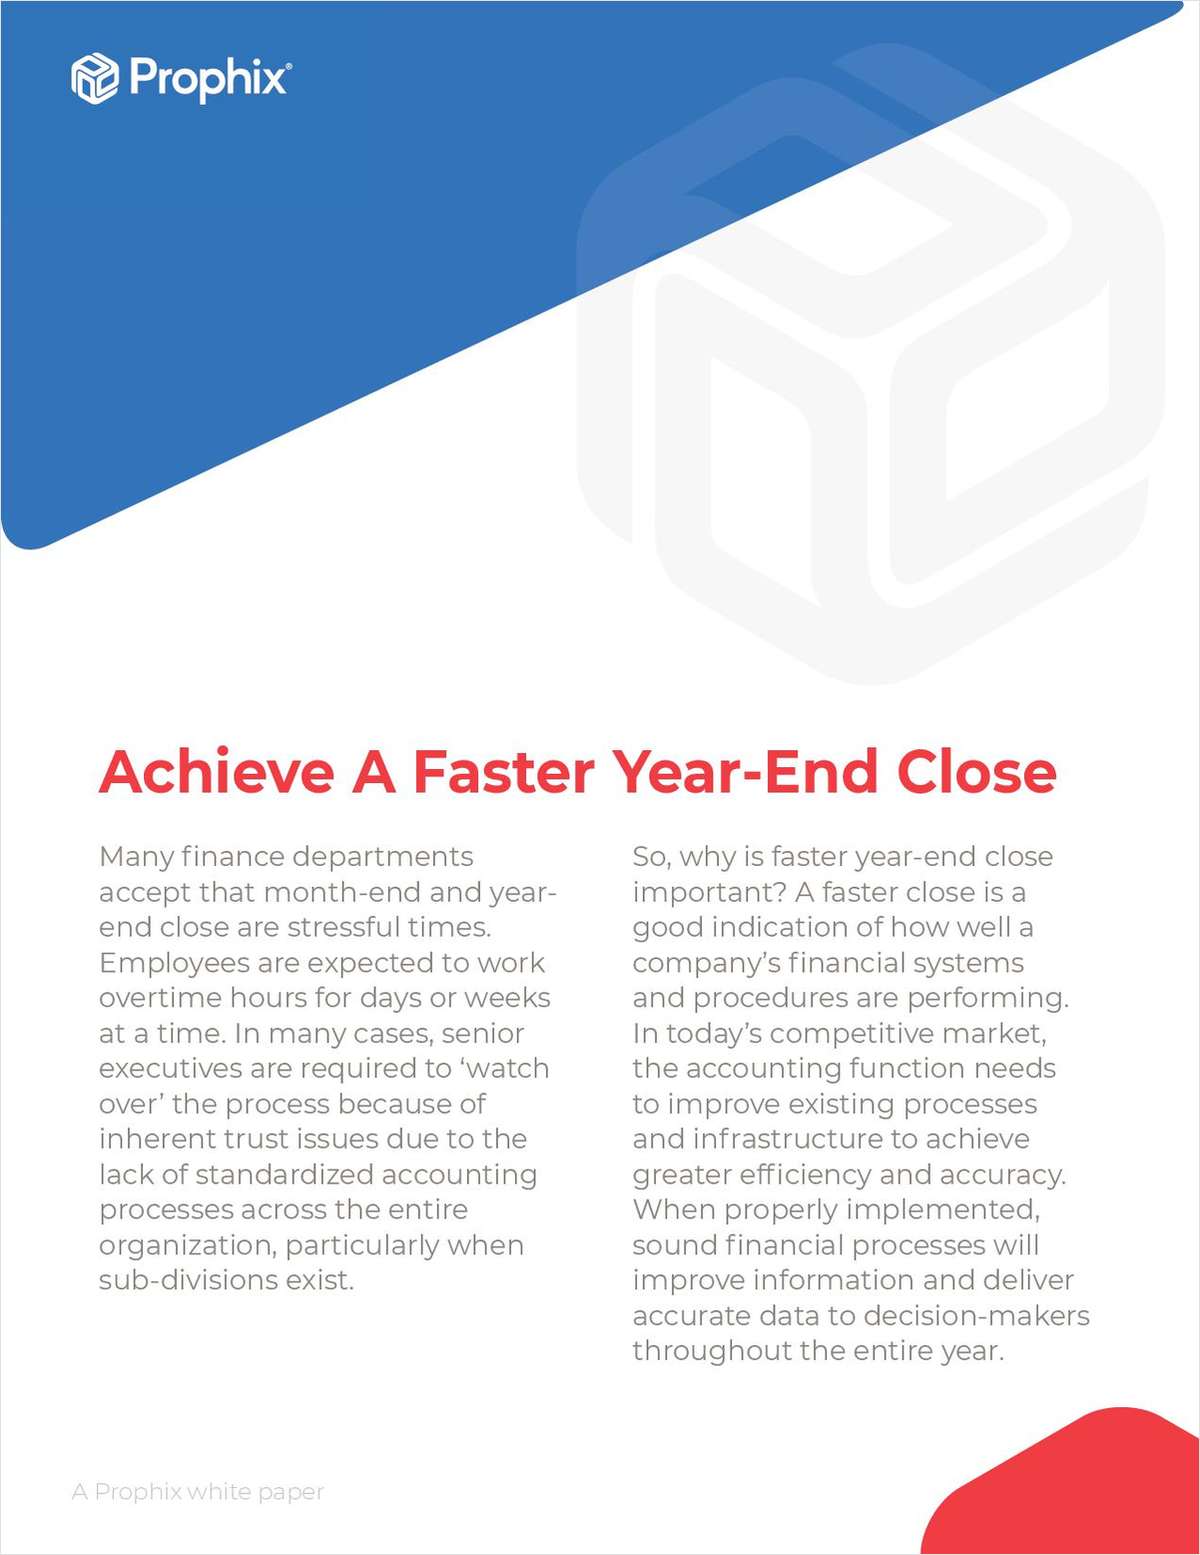 Achieve A Faster Year-End Close in Sage Intacct